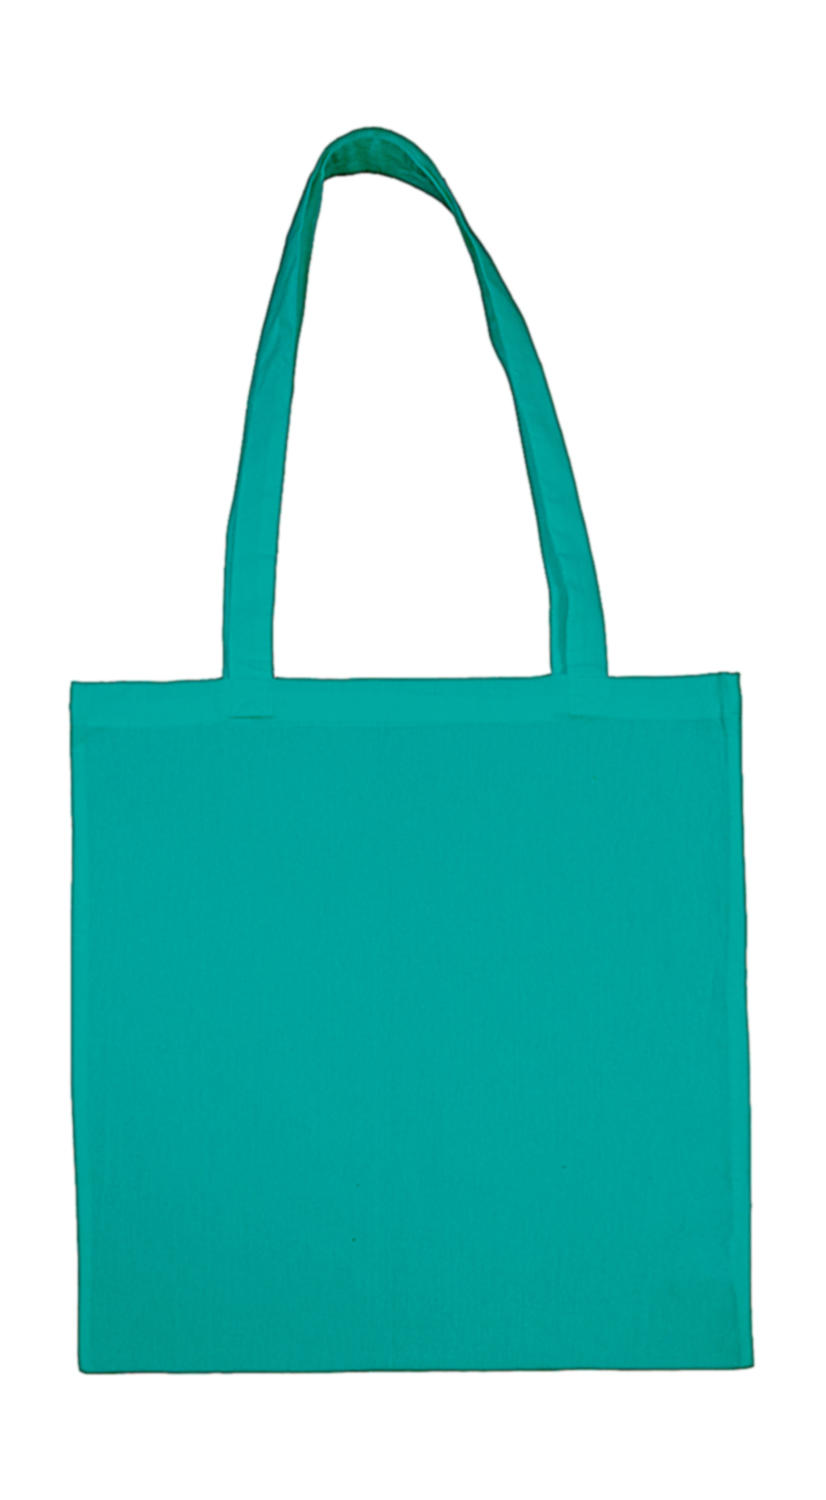  Cotton Bag LH in Farbe Turquoise